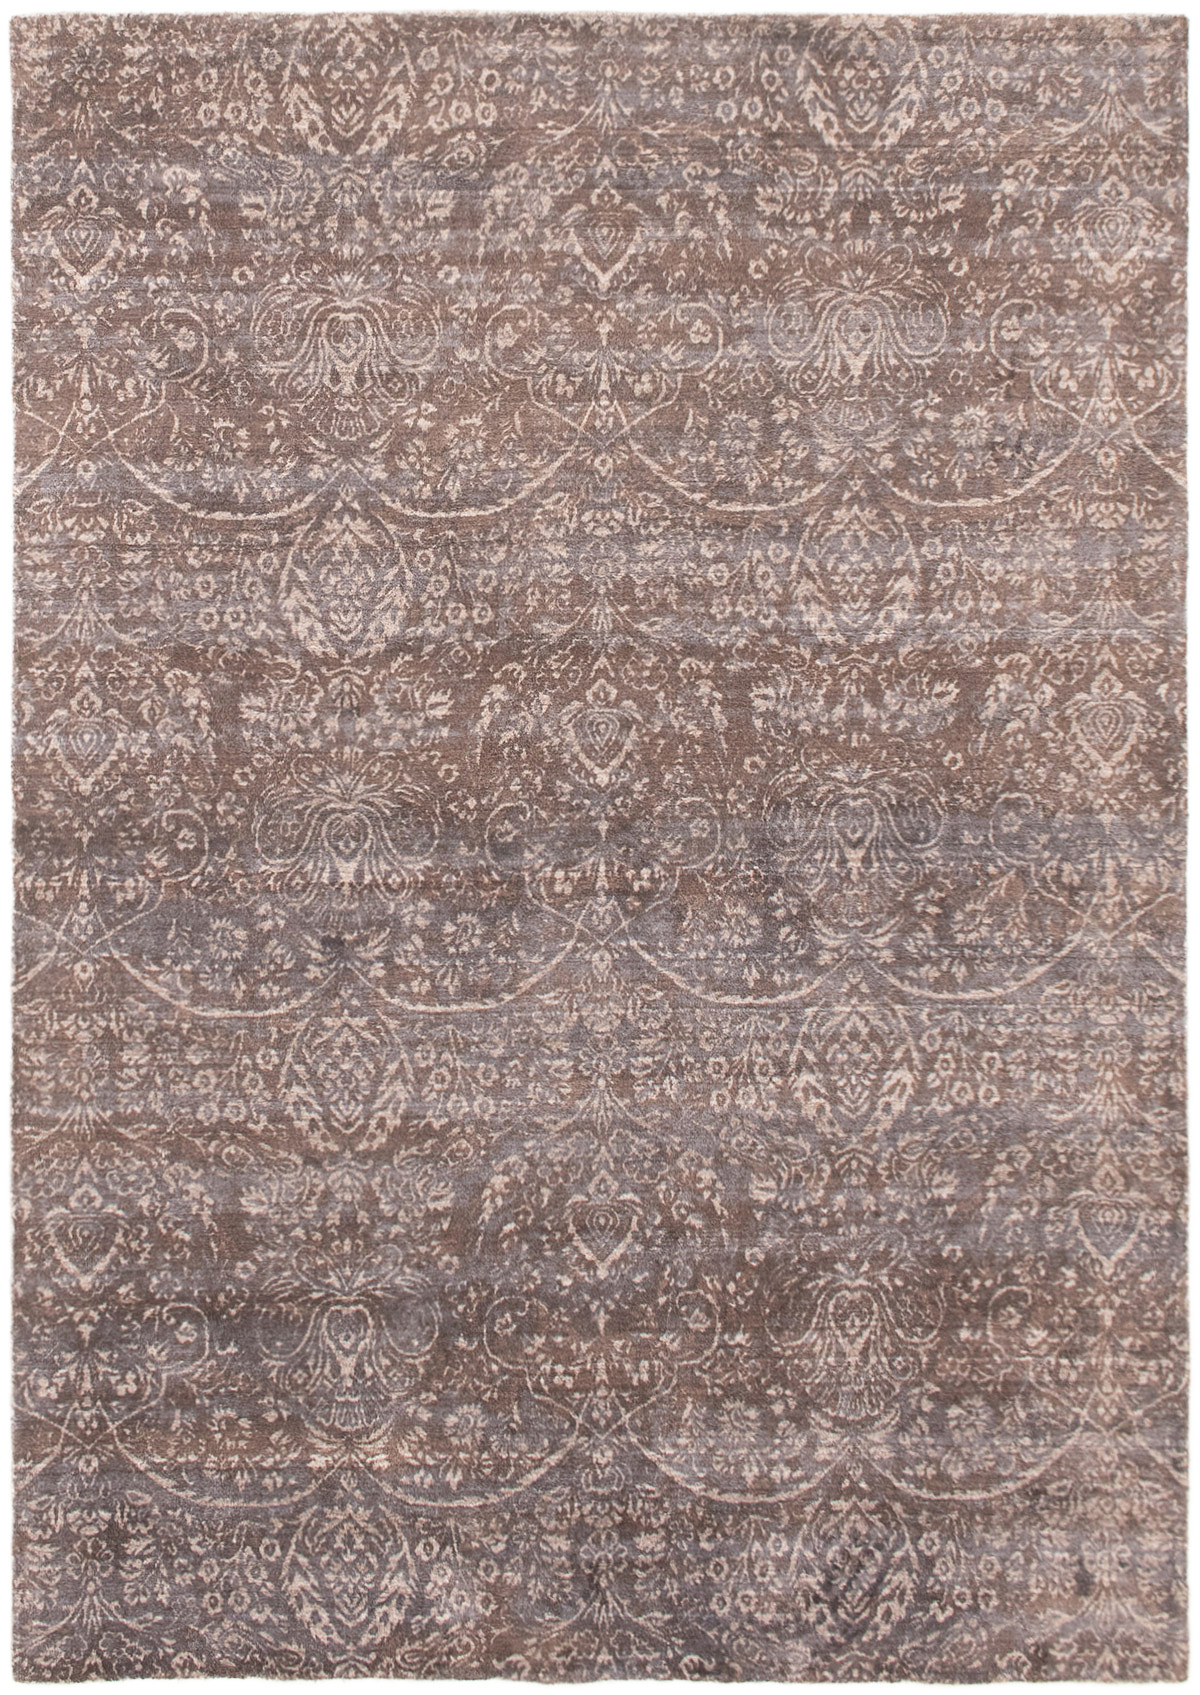 Hand-knotted Galleria Brown Viscose Rug 5'3" x 7'5" Size: 5'3" x 7'5"  